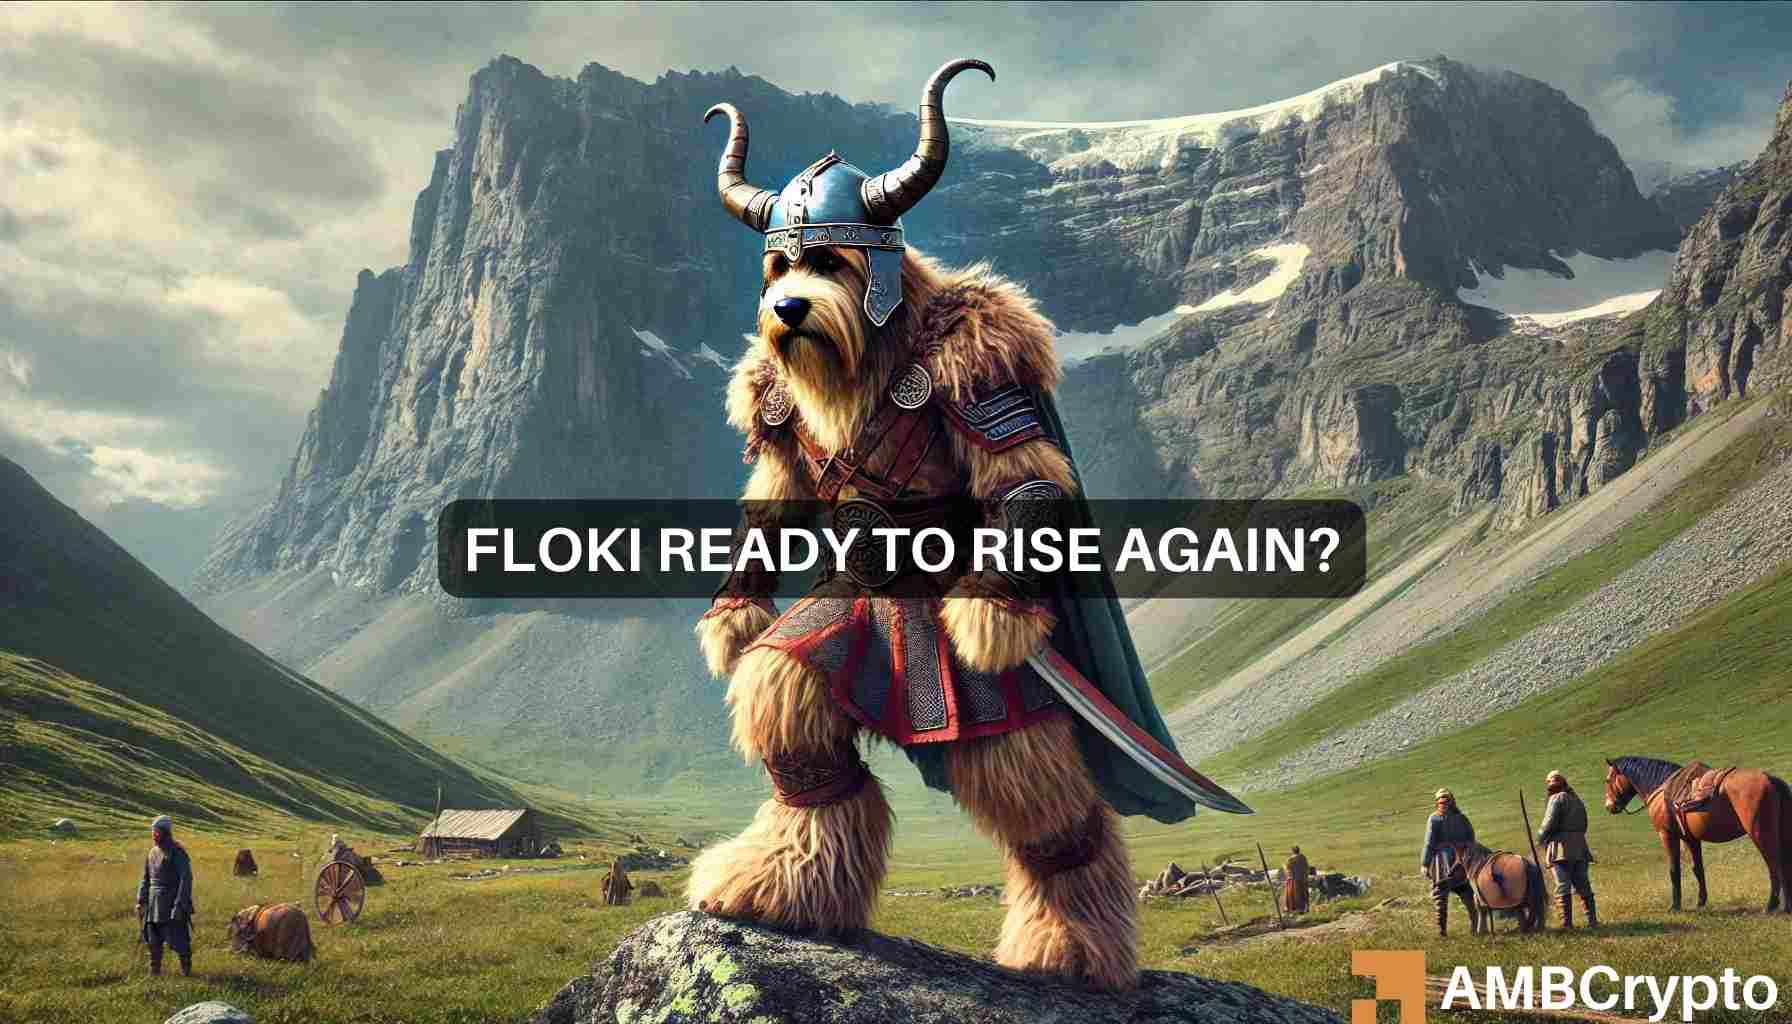 FLOKI Price Prediction - 25% gains possible, but ONLY if...